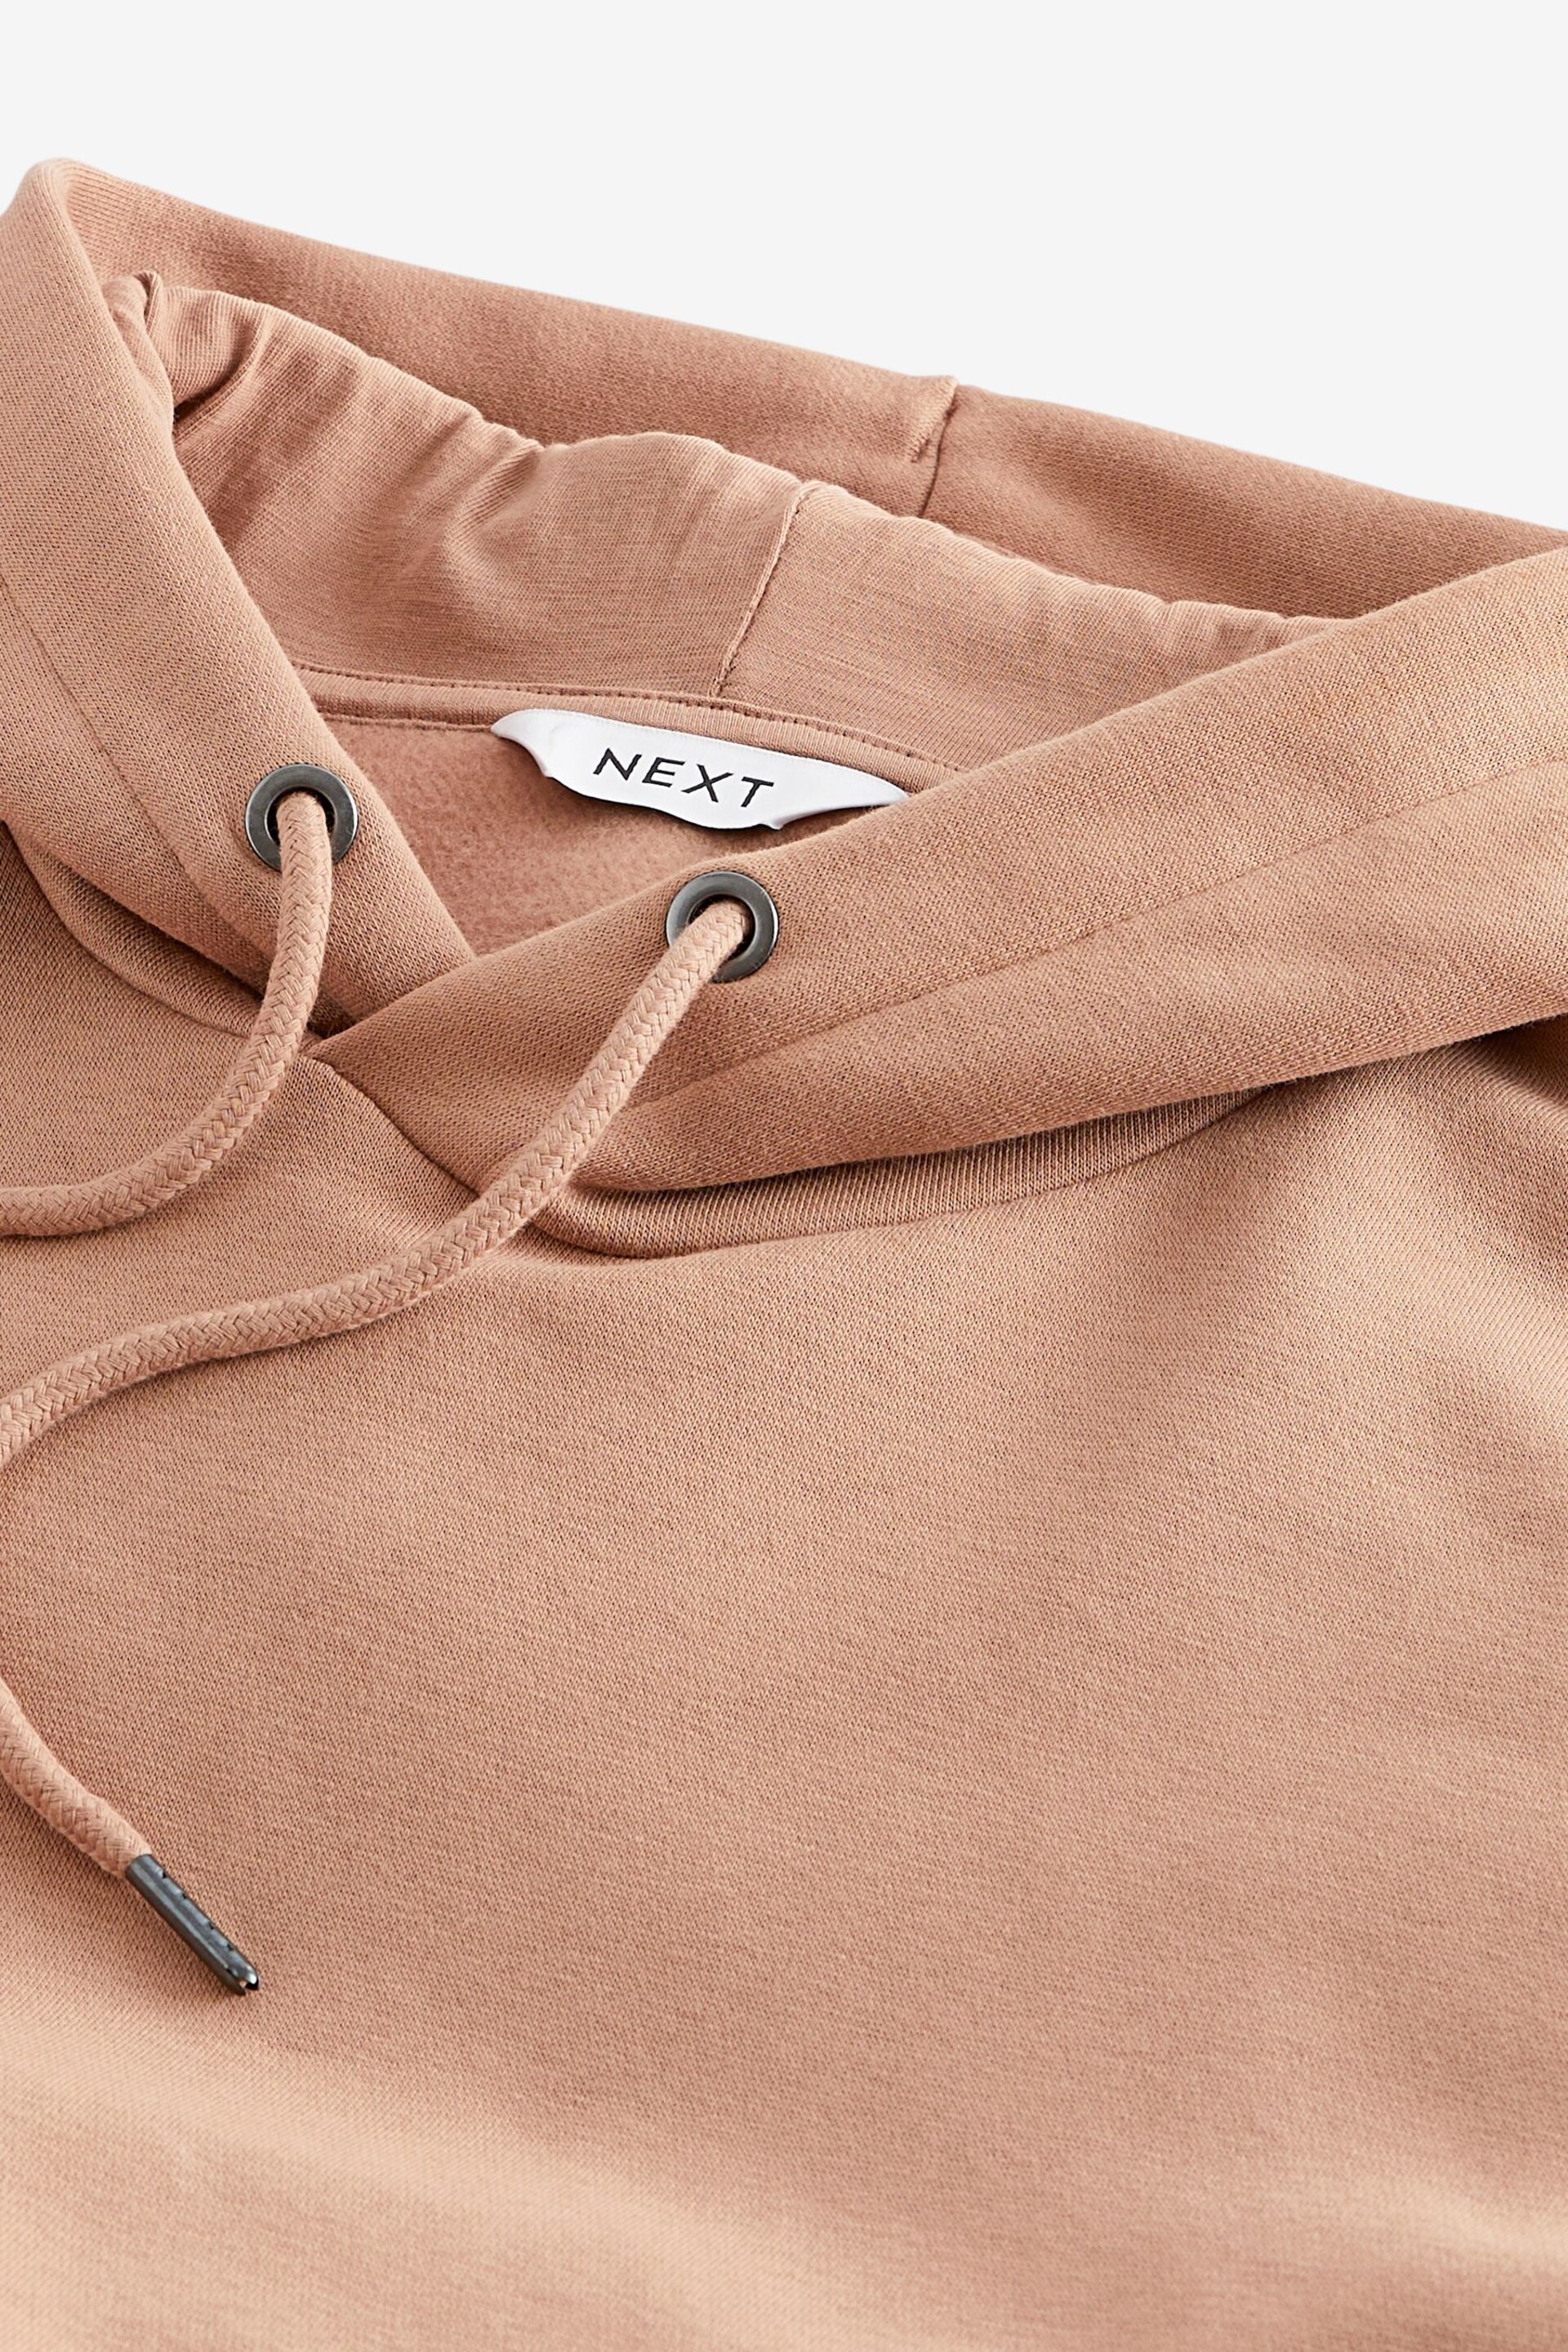 Clay/Neutral Regular Fit Jersey Cotton Rich Overhead Hoodie - Image 7 of 8